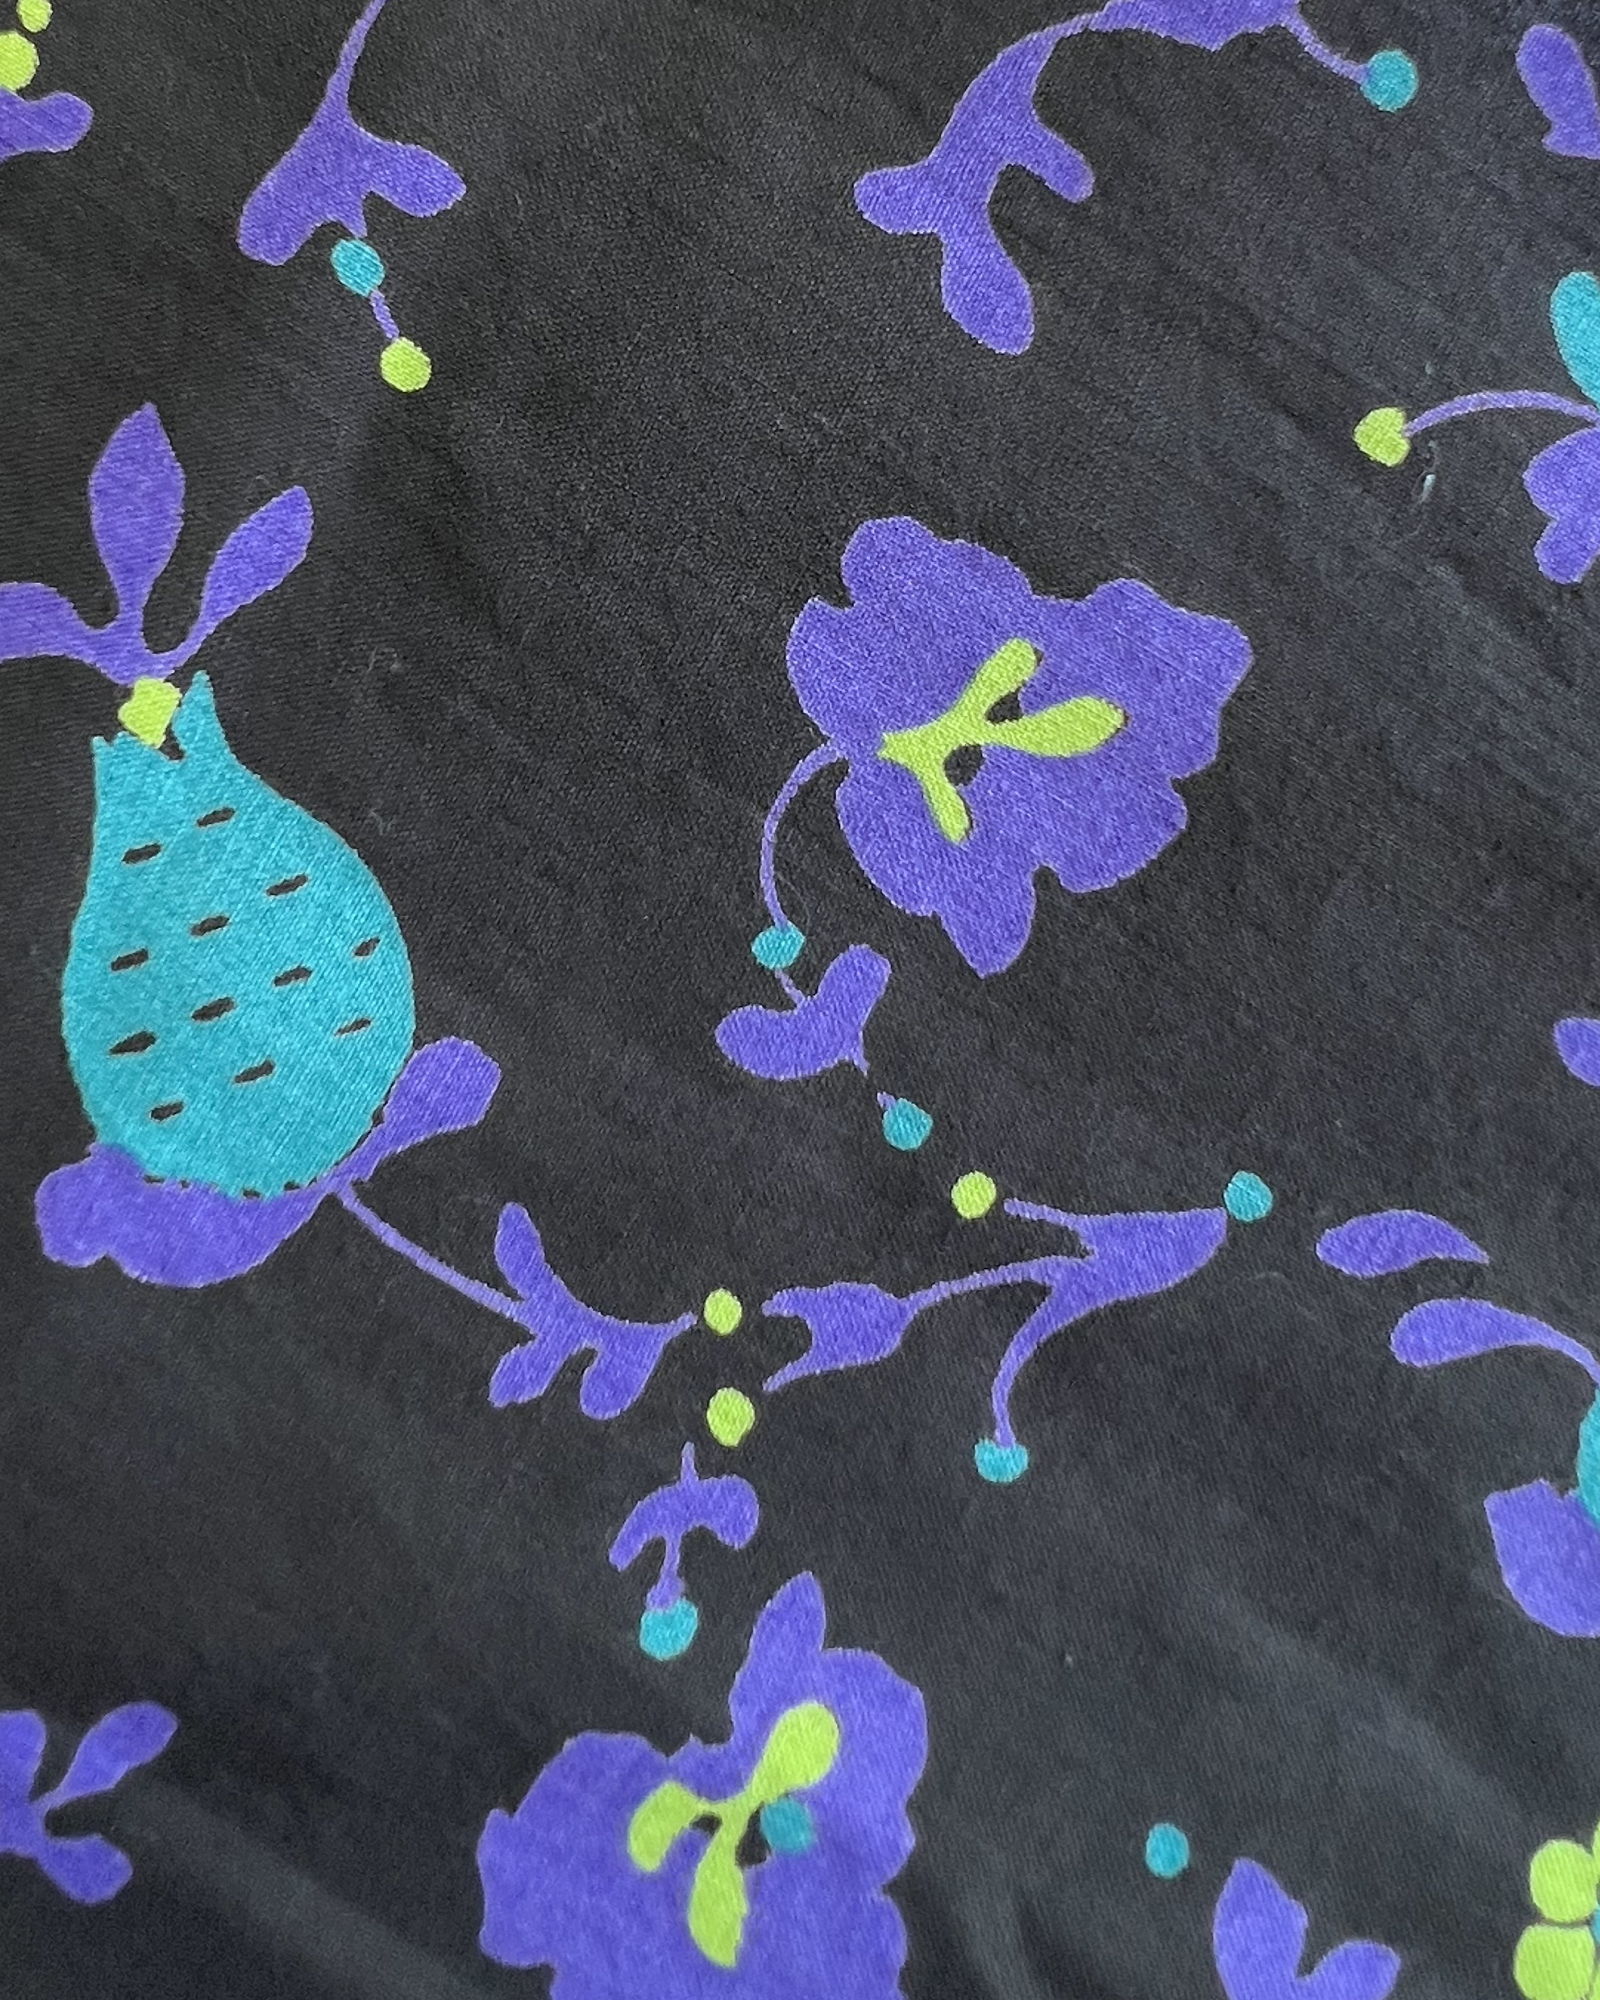 Early 1960s Stylized Floral Cotton